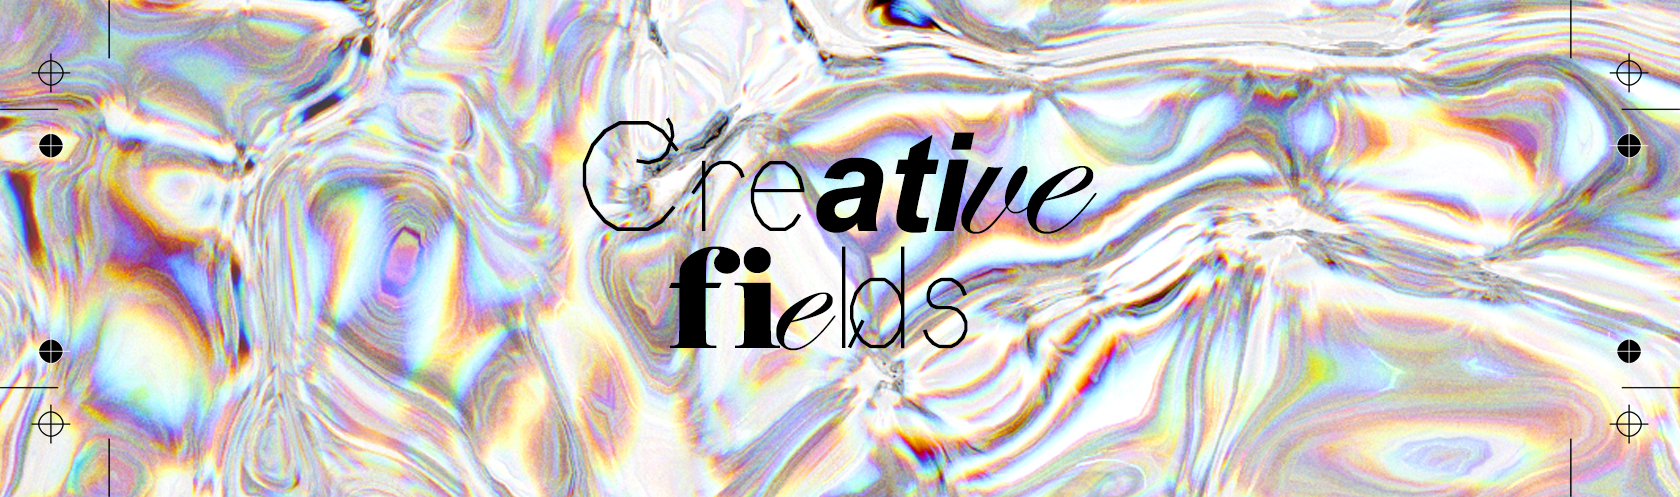 CREATIVE FIELDS – HERITAGE SPACE V